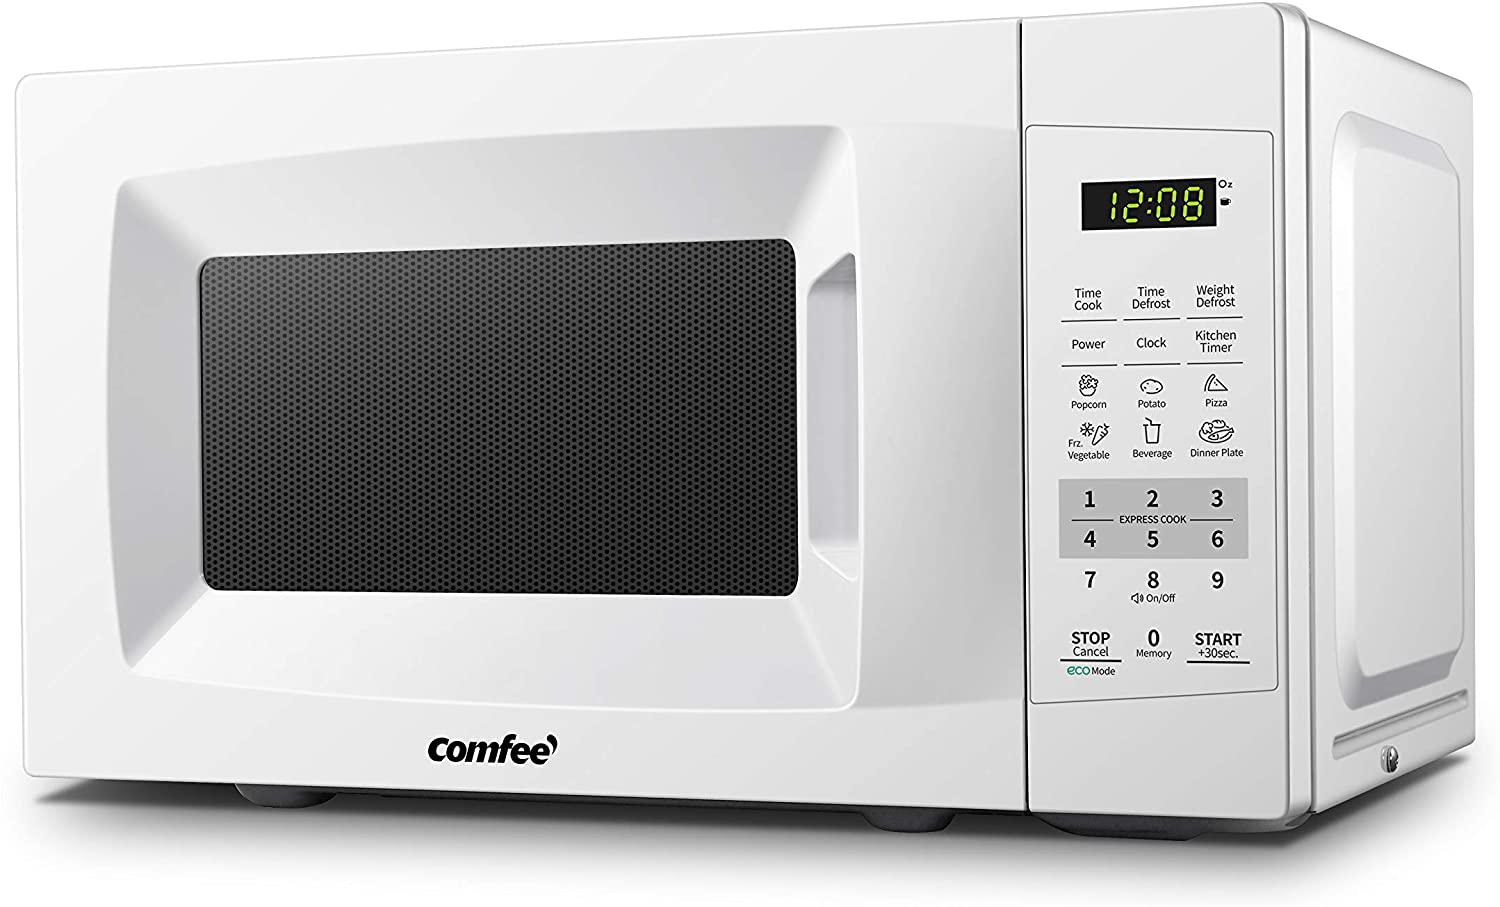 5 Quietest Microwaves with Silent Mode - Soundproof Empire